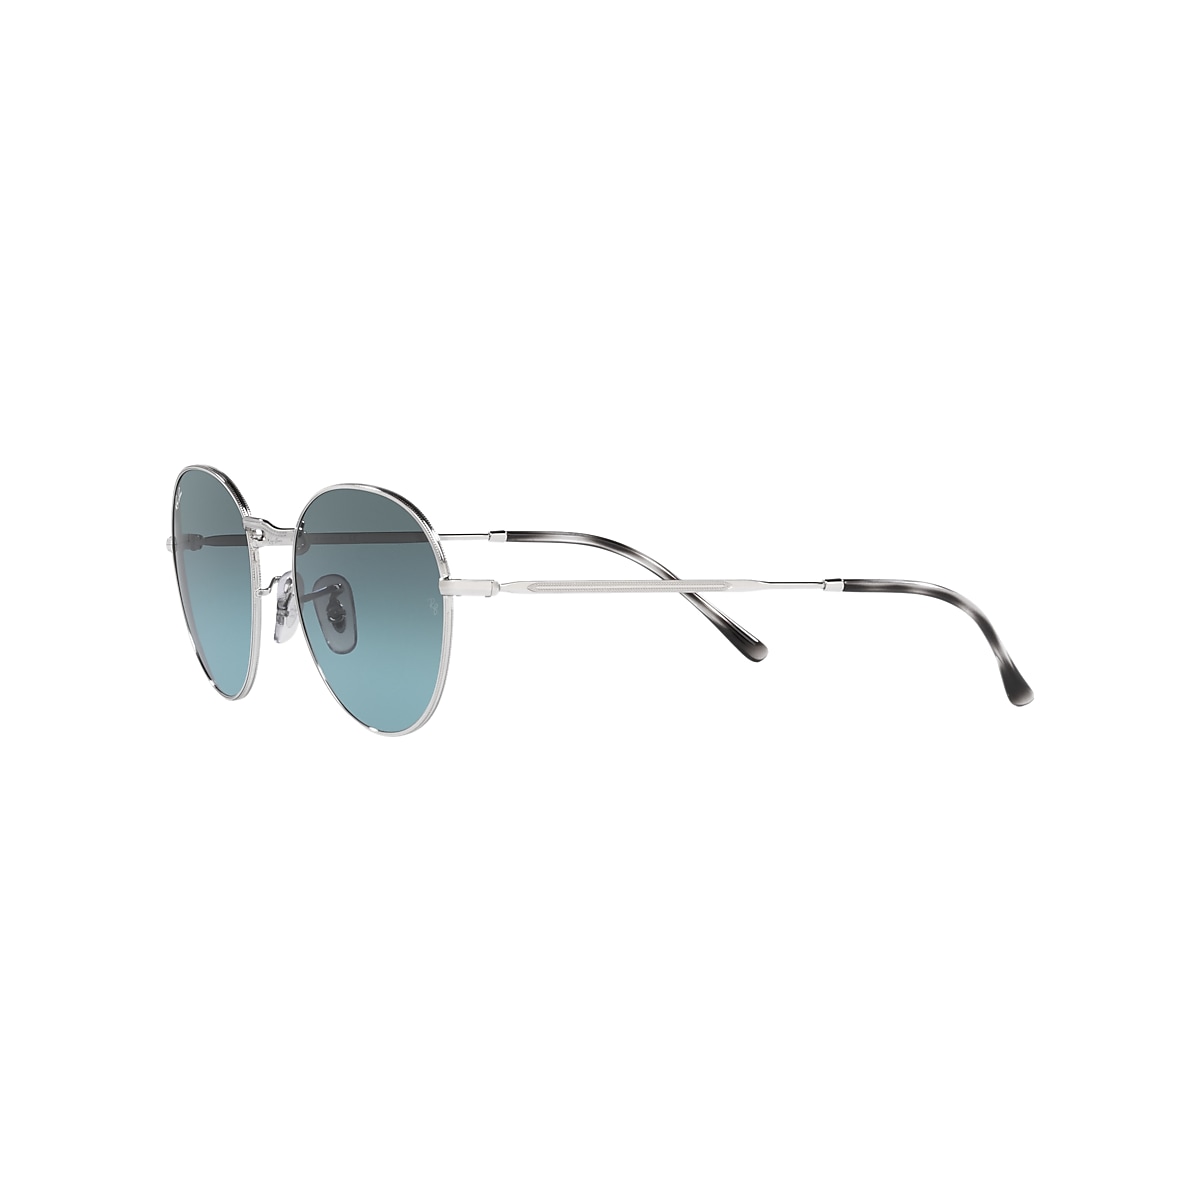 DAVID Sunglasses in Silver and Blue - RB3582 | Ray-Ban® US